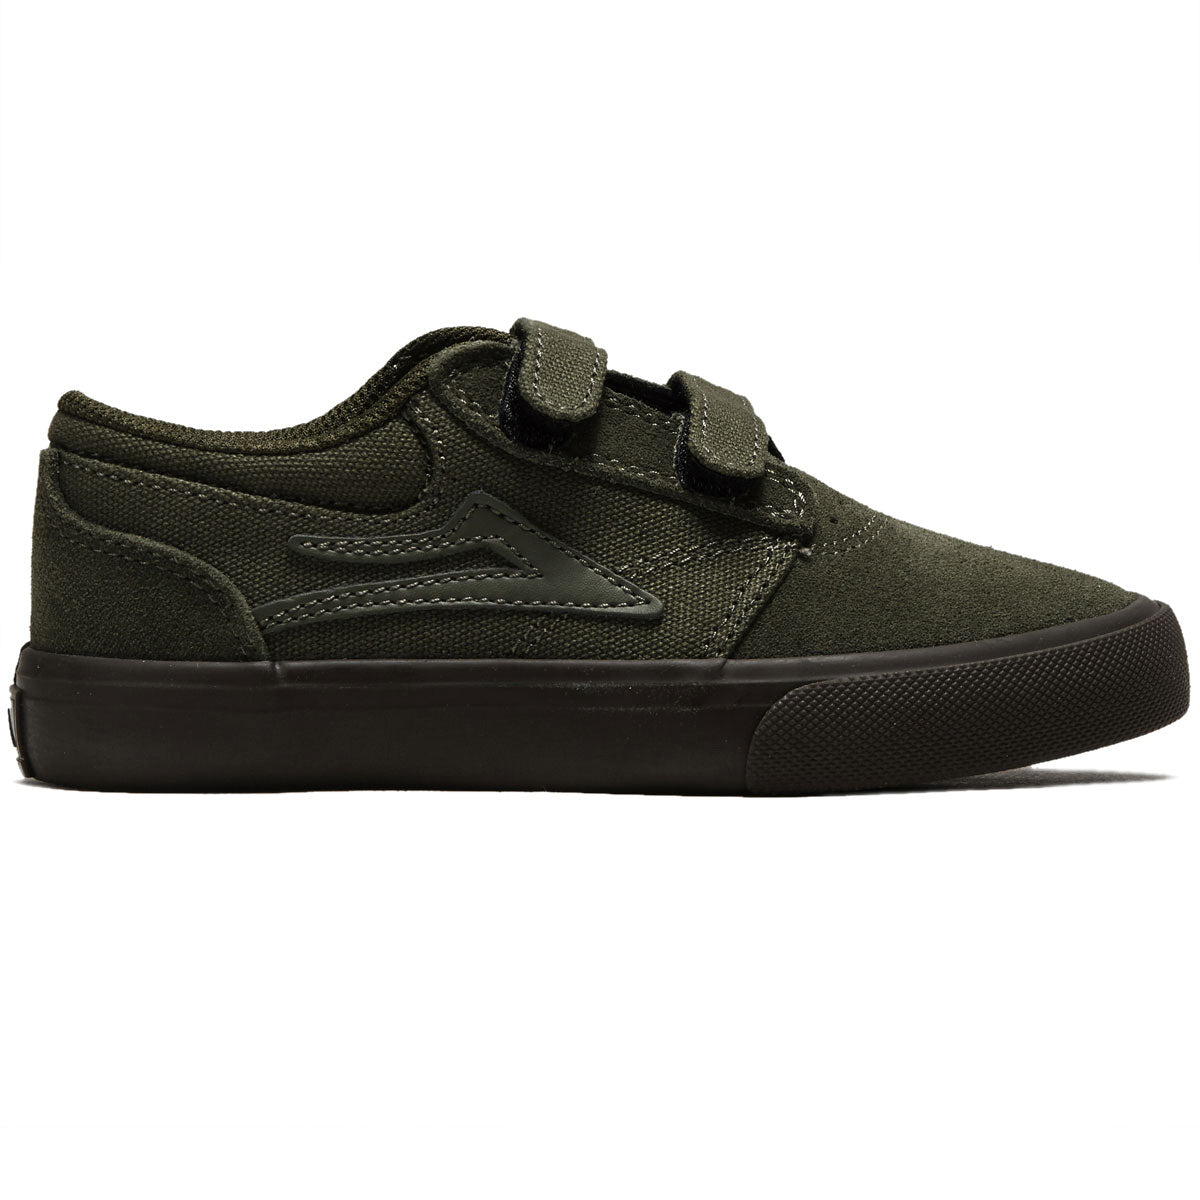 Lakai Youth Griffin Shoes - Olive/Gum Suede image 1